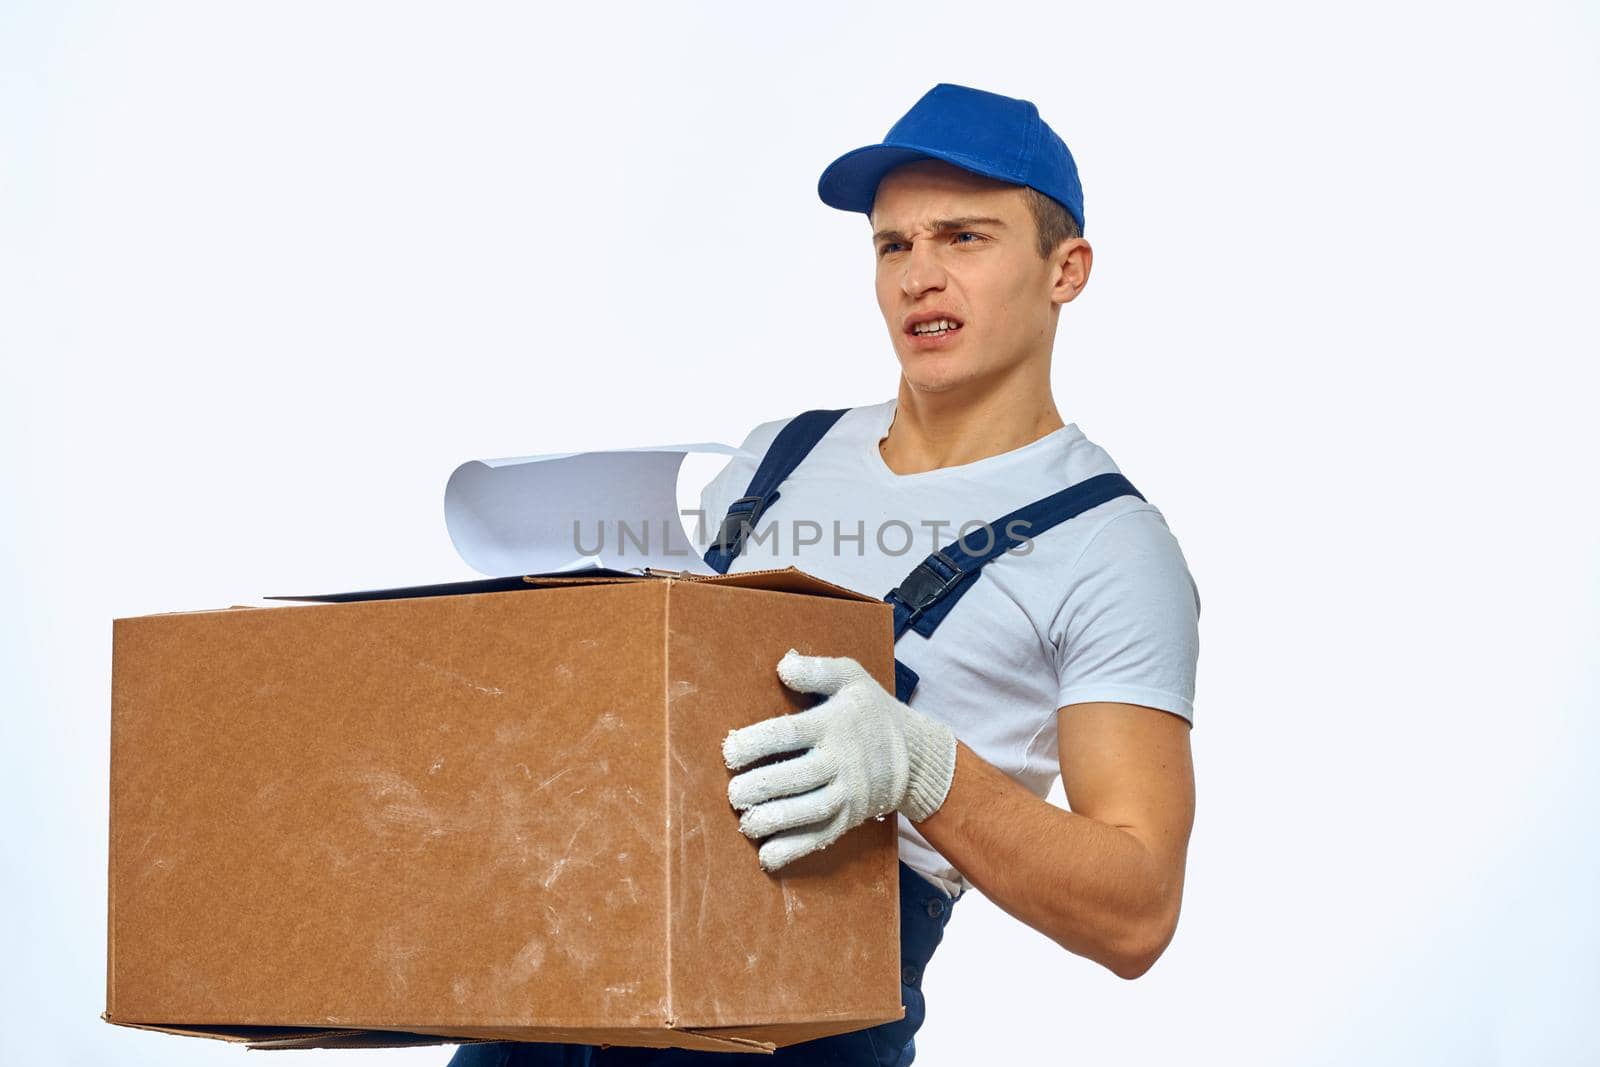 Man in working uniform sound volume delivery Professional. High quality photo